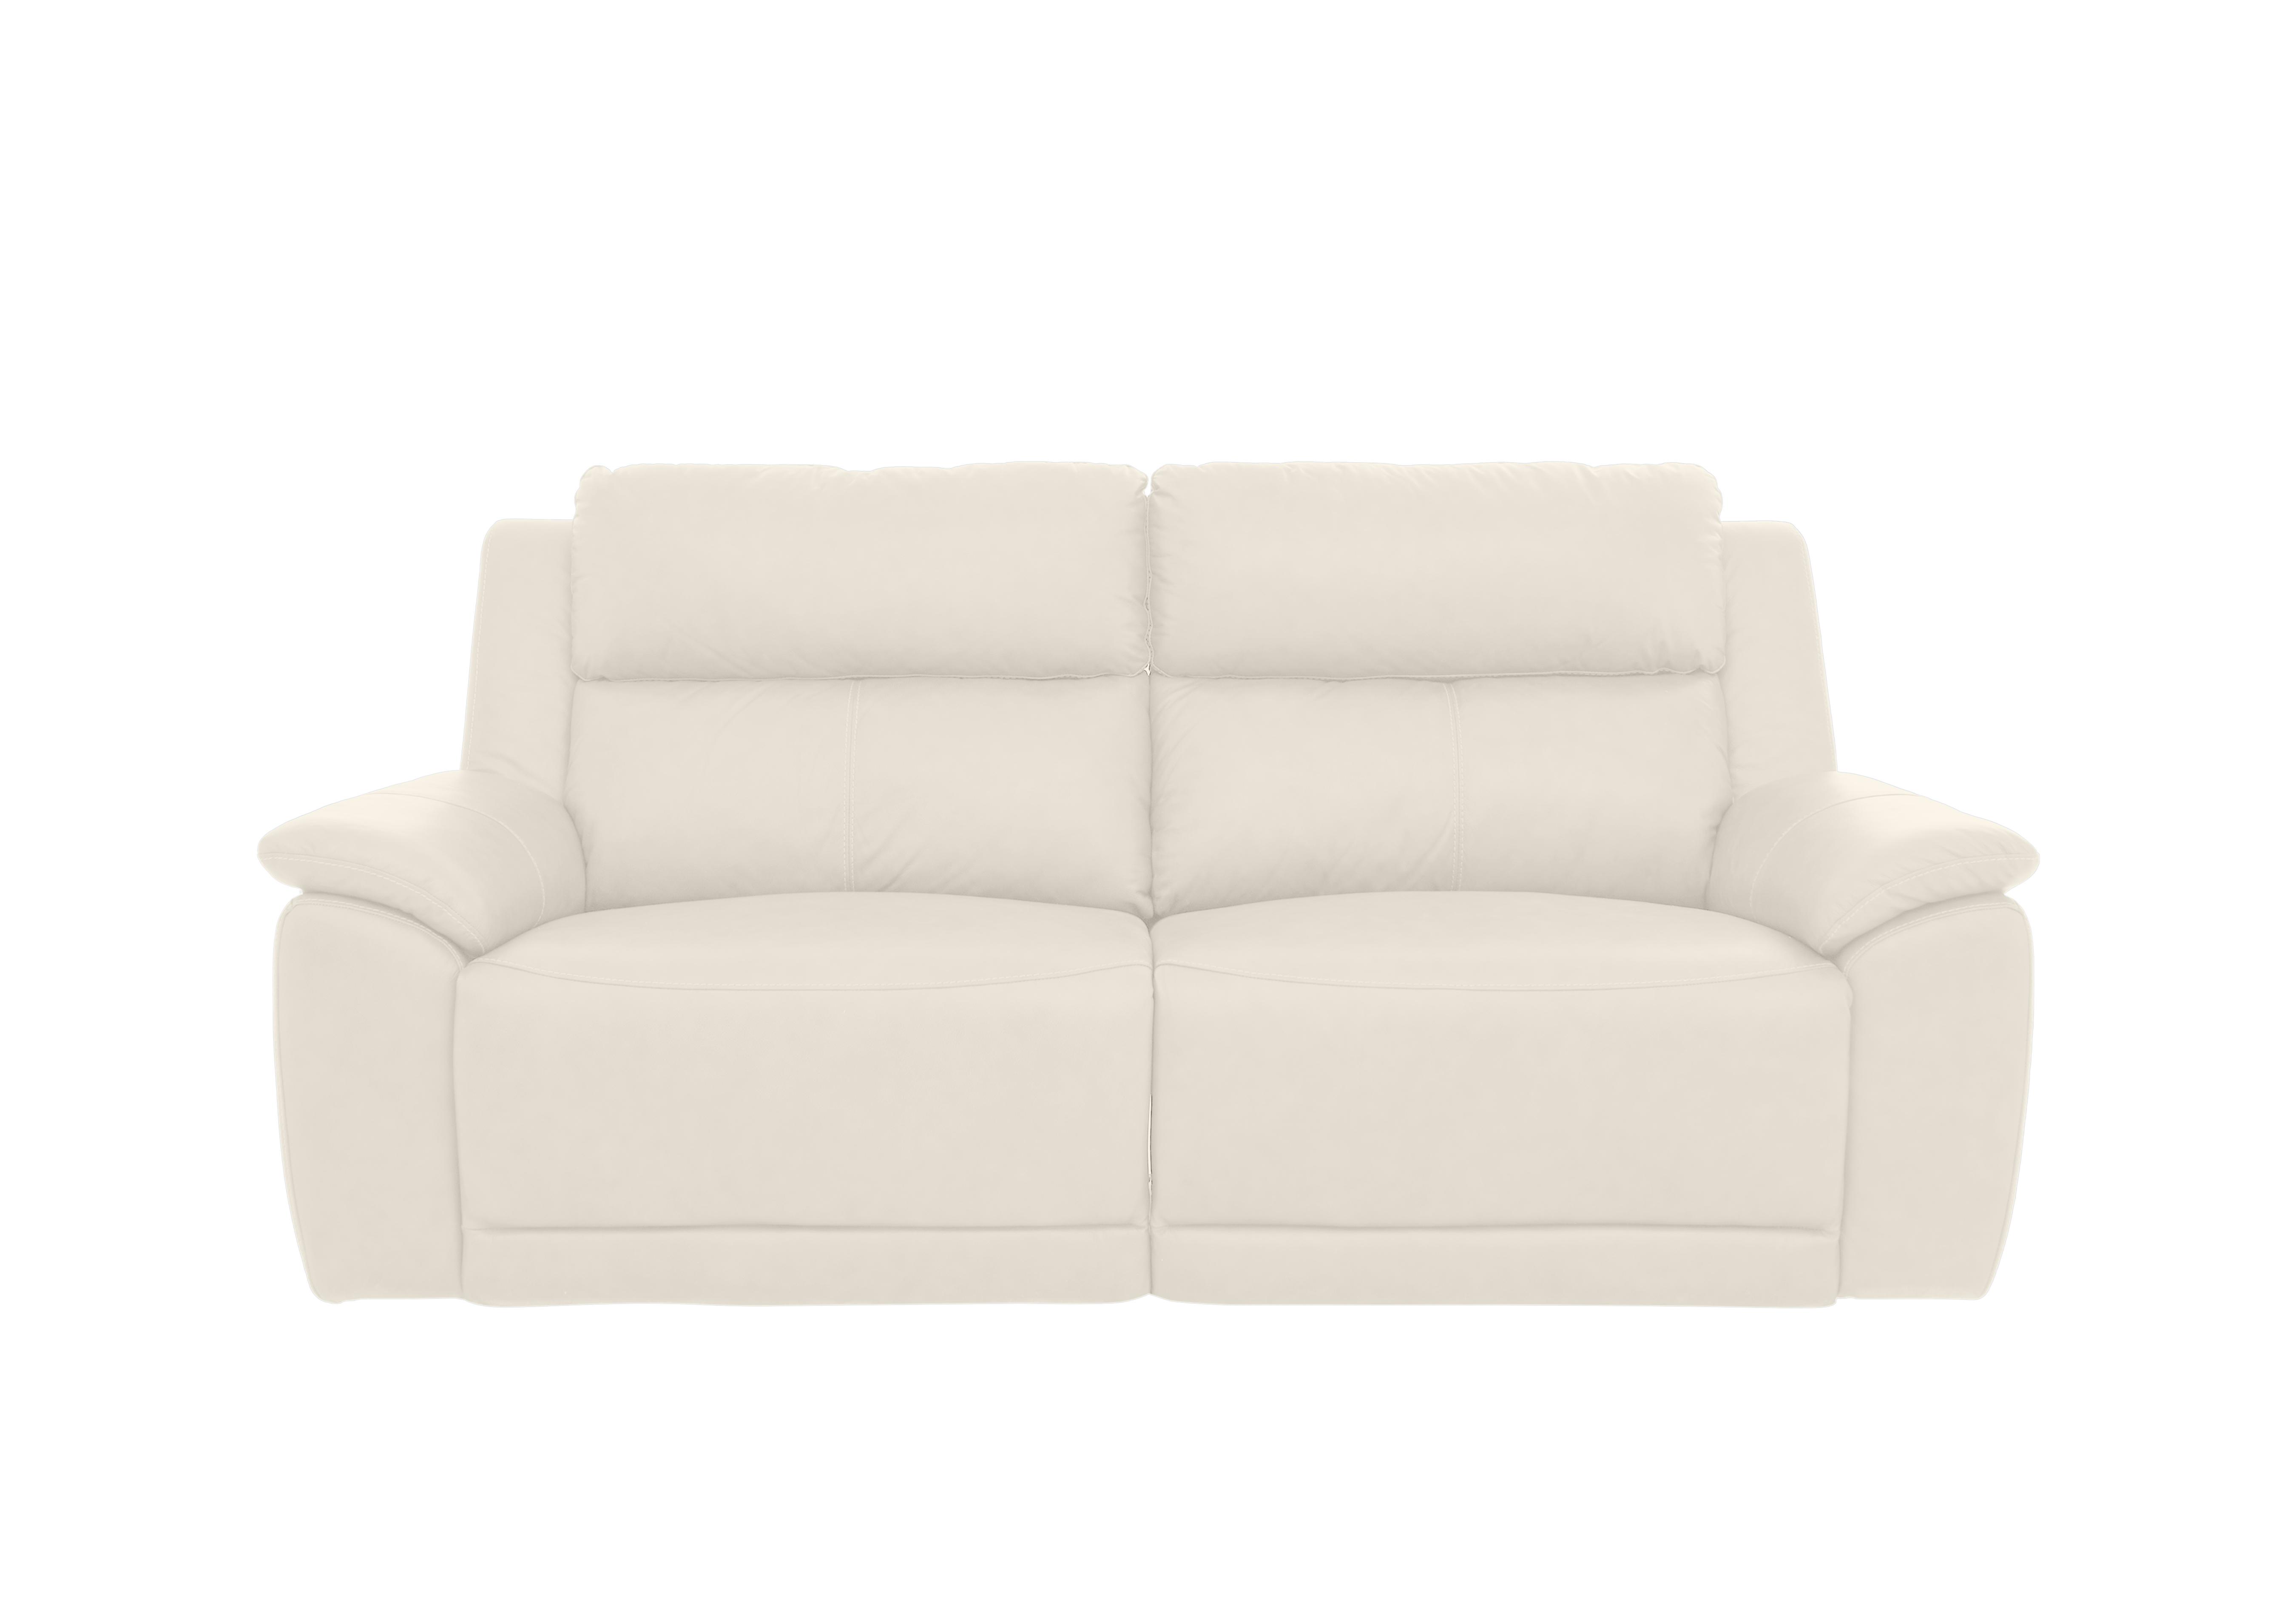 Utah 3 Seater Leather Power Recliner Sofa with Power Headrests and Power Lumbar in White Le-9307 on Furniture Village